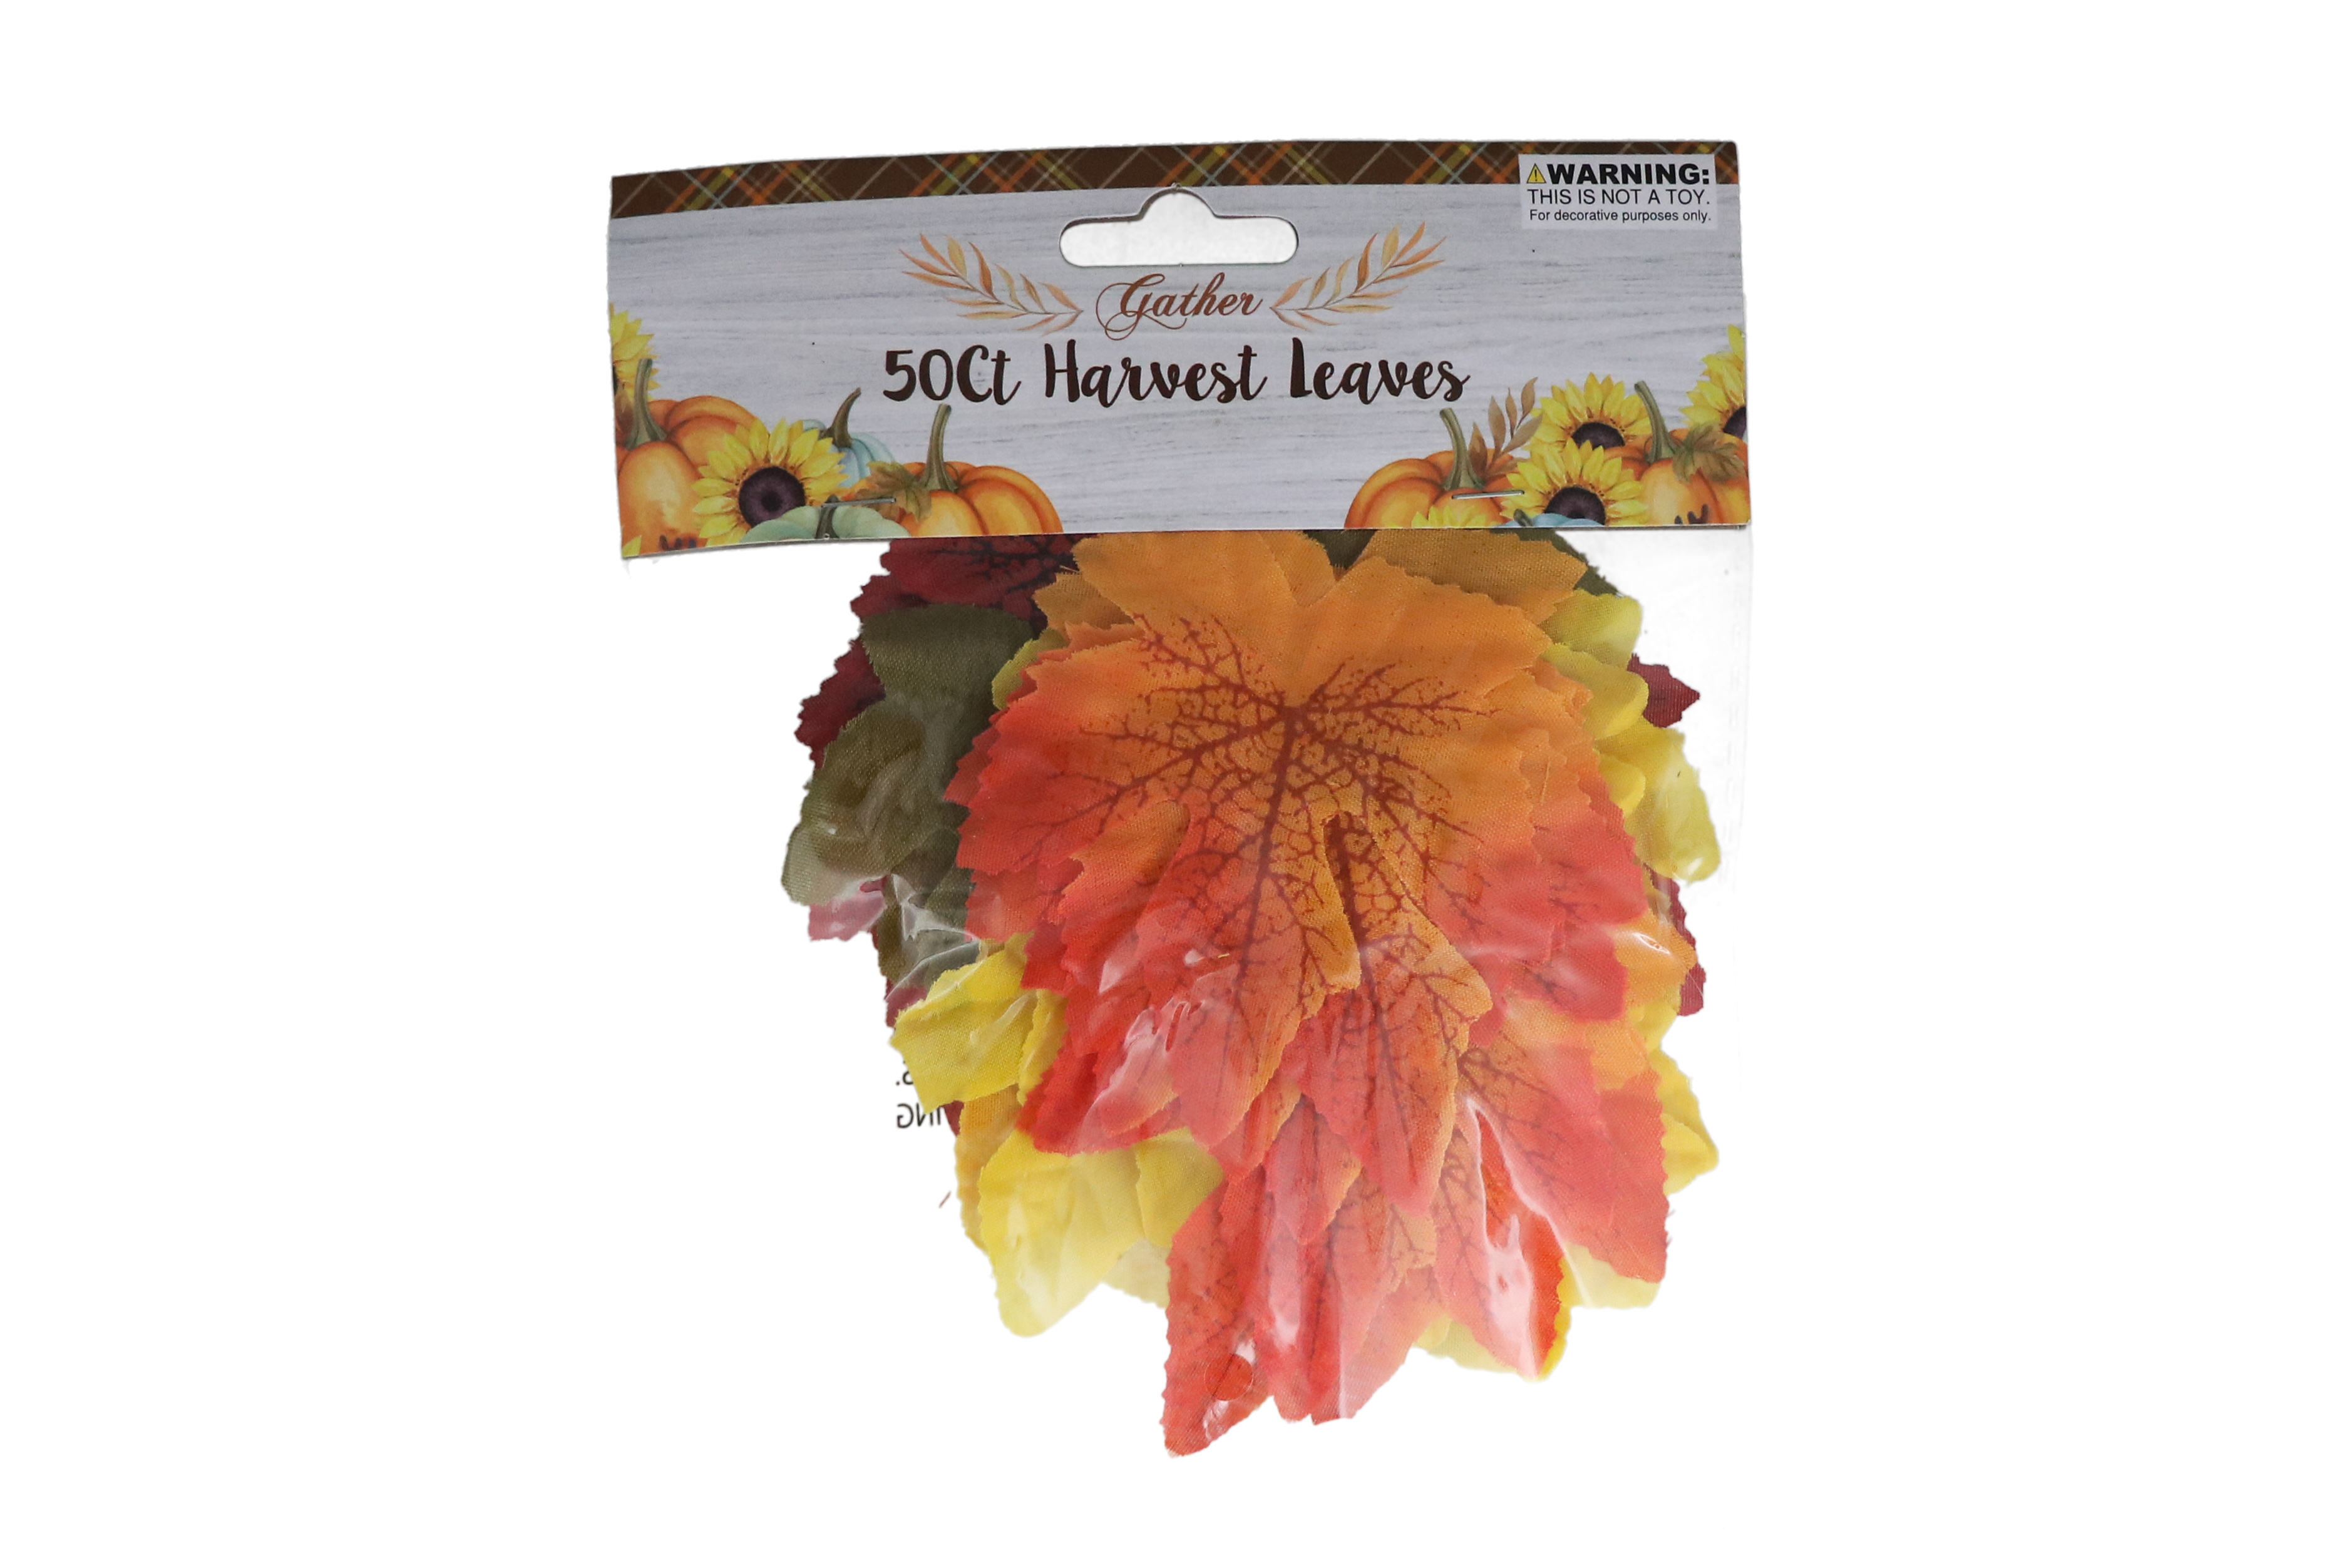 1.99 HAVREST LEAVES 50 CT